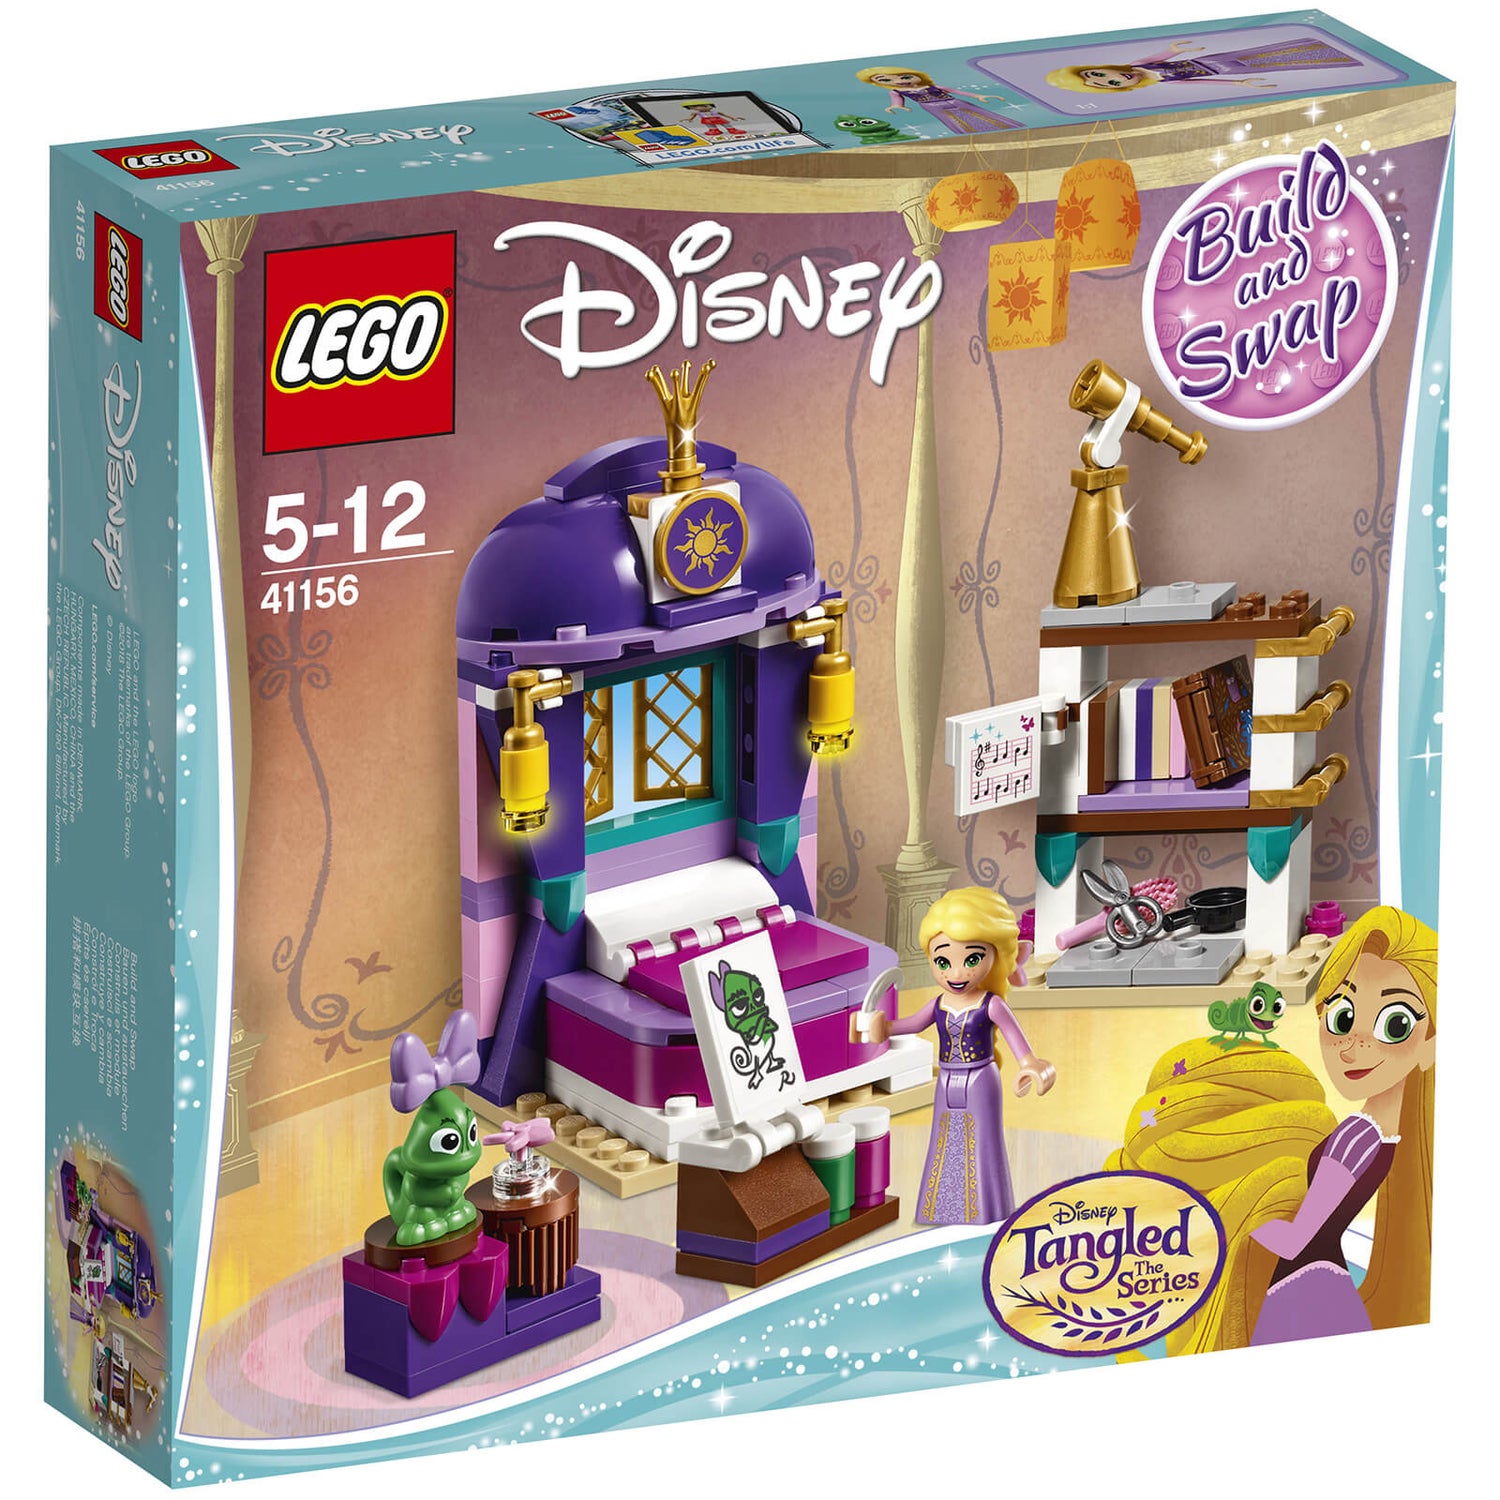 Disney Princess Fisher-Price Little People Get Ready with Rapunzel Figure  Set